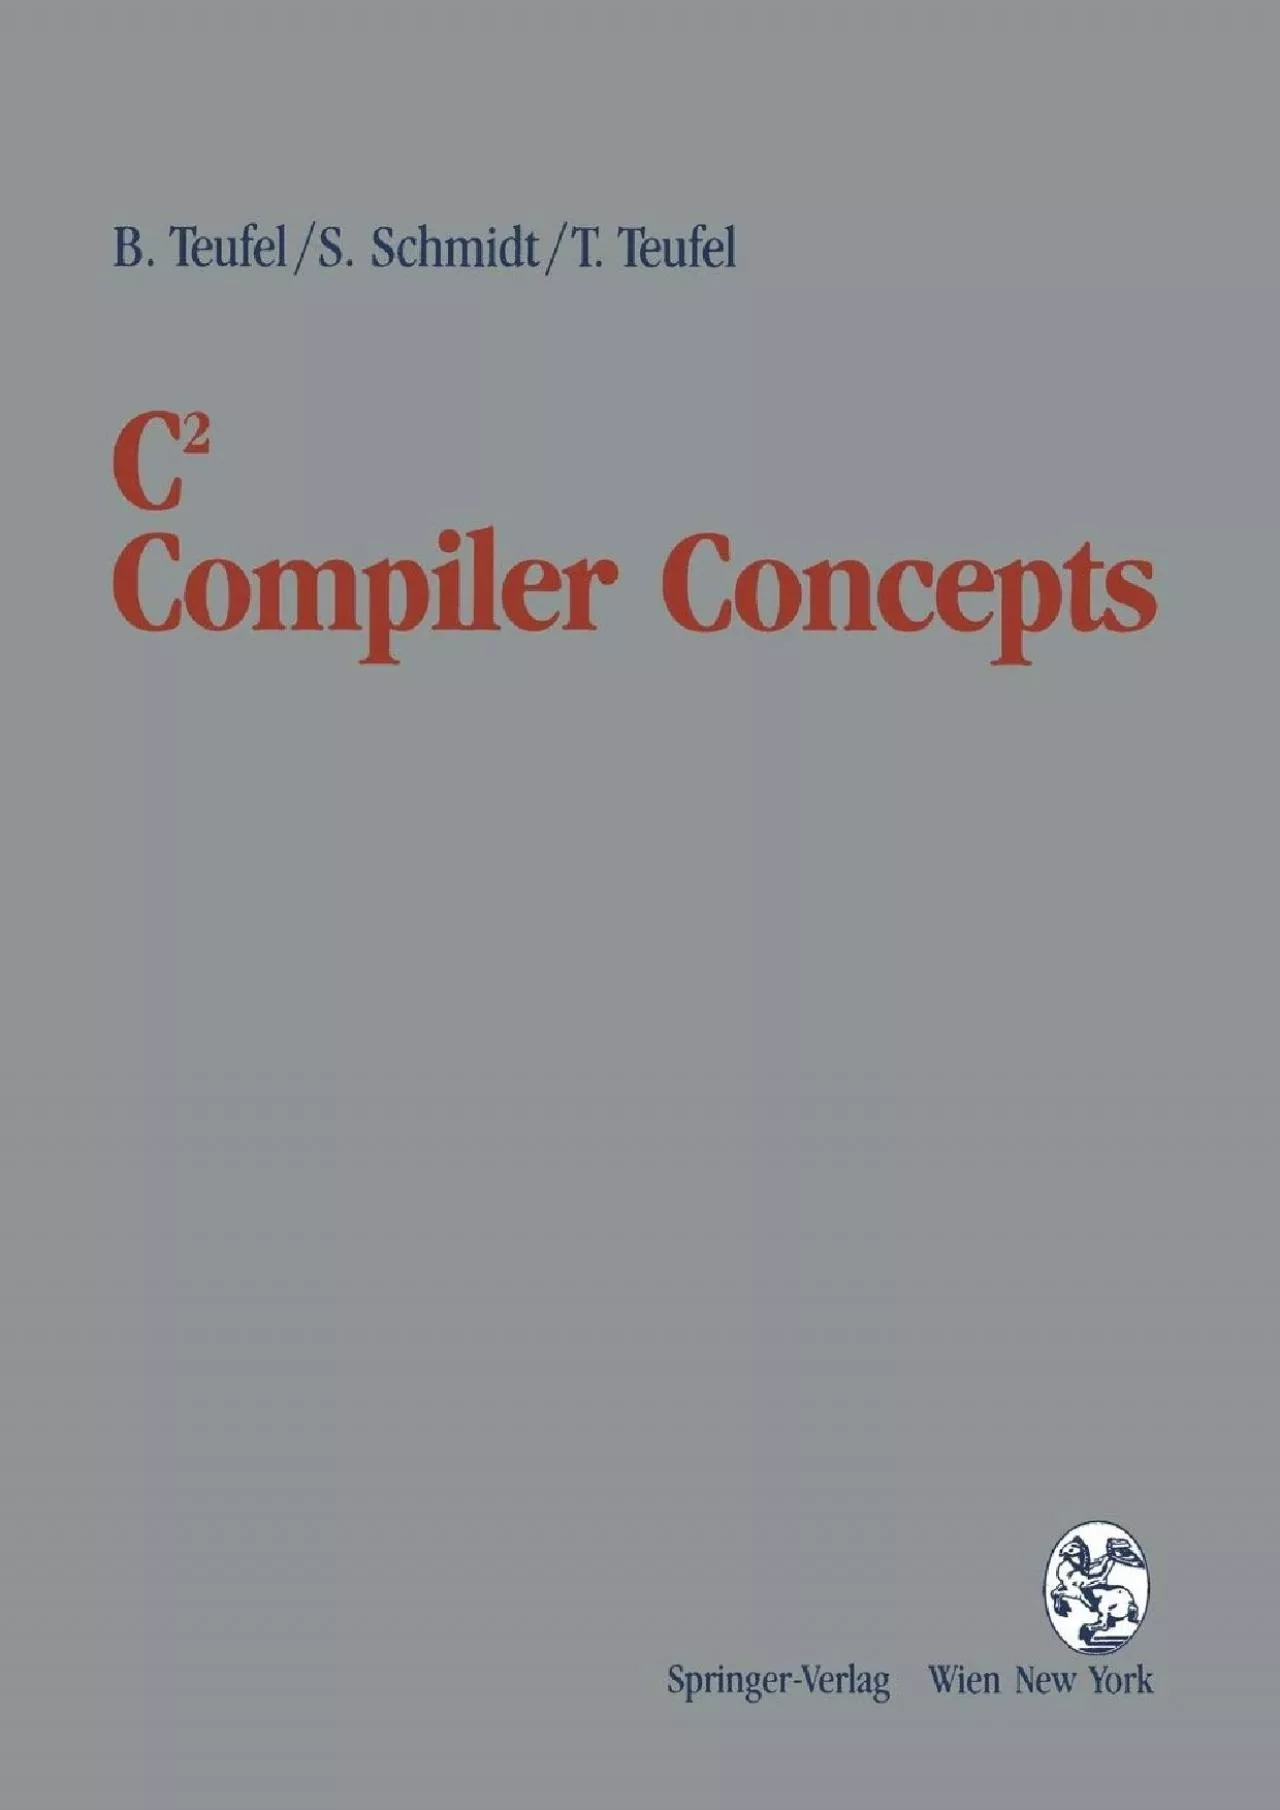 [FREE]-C2 Compiler Concepts